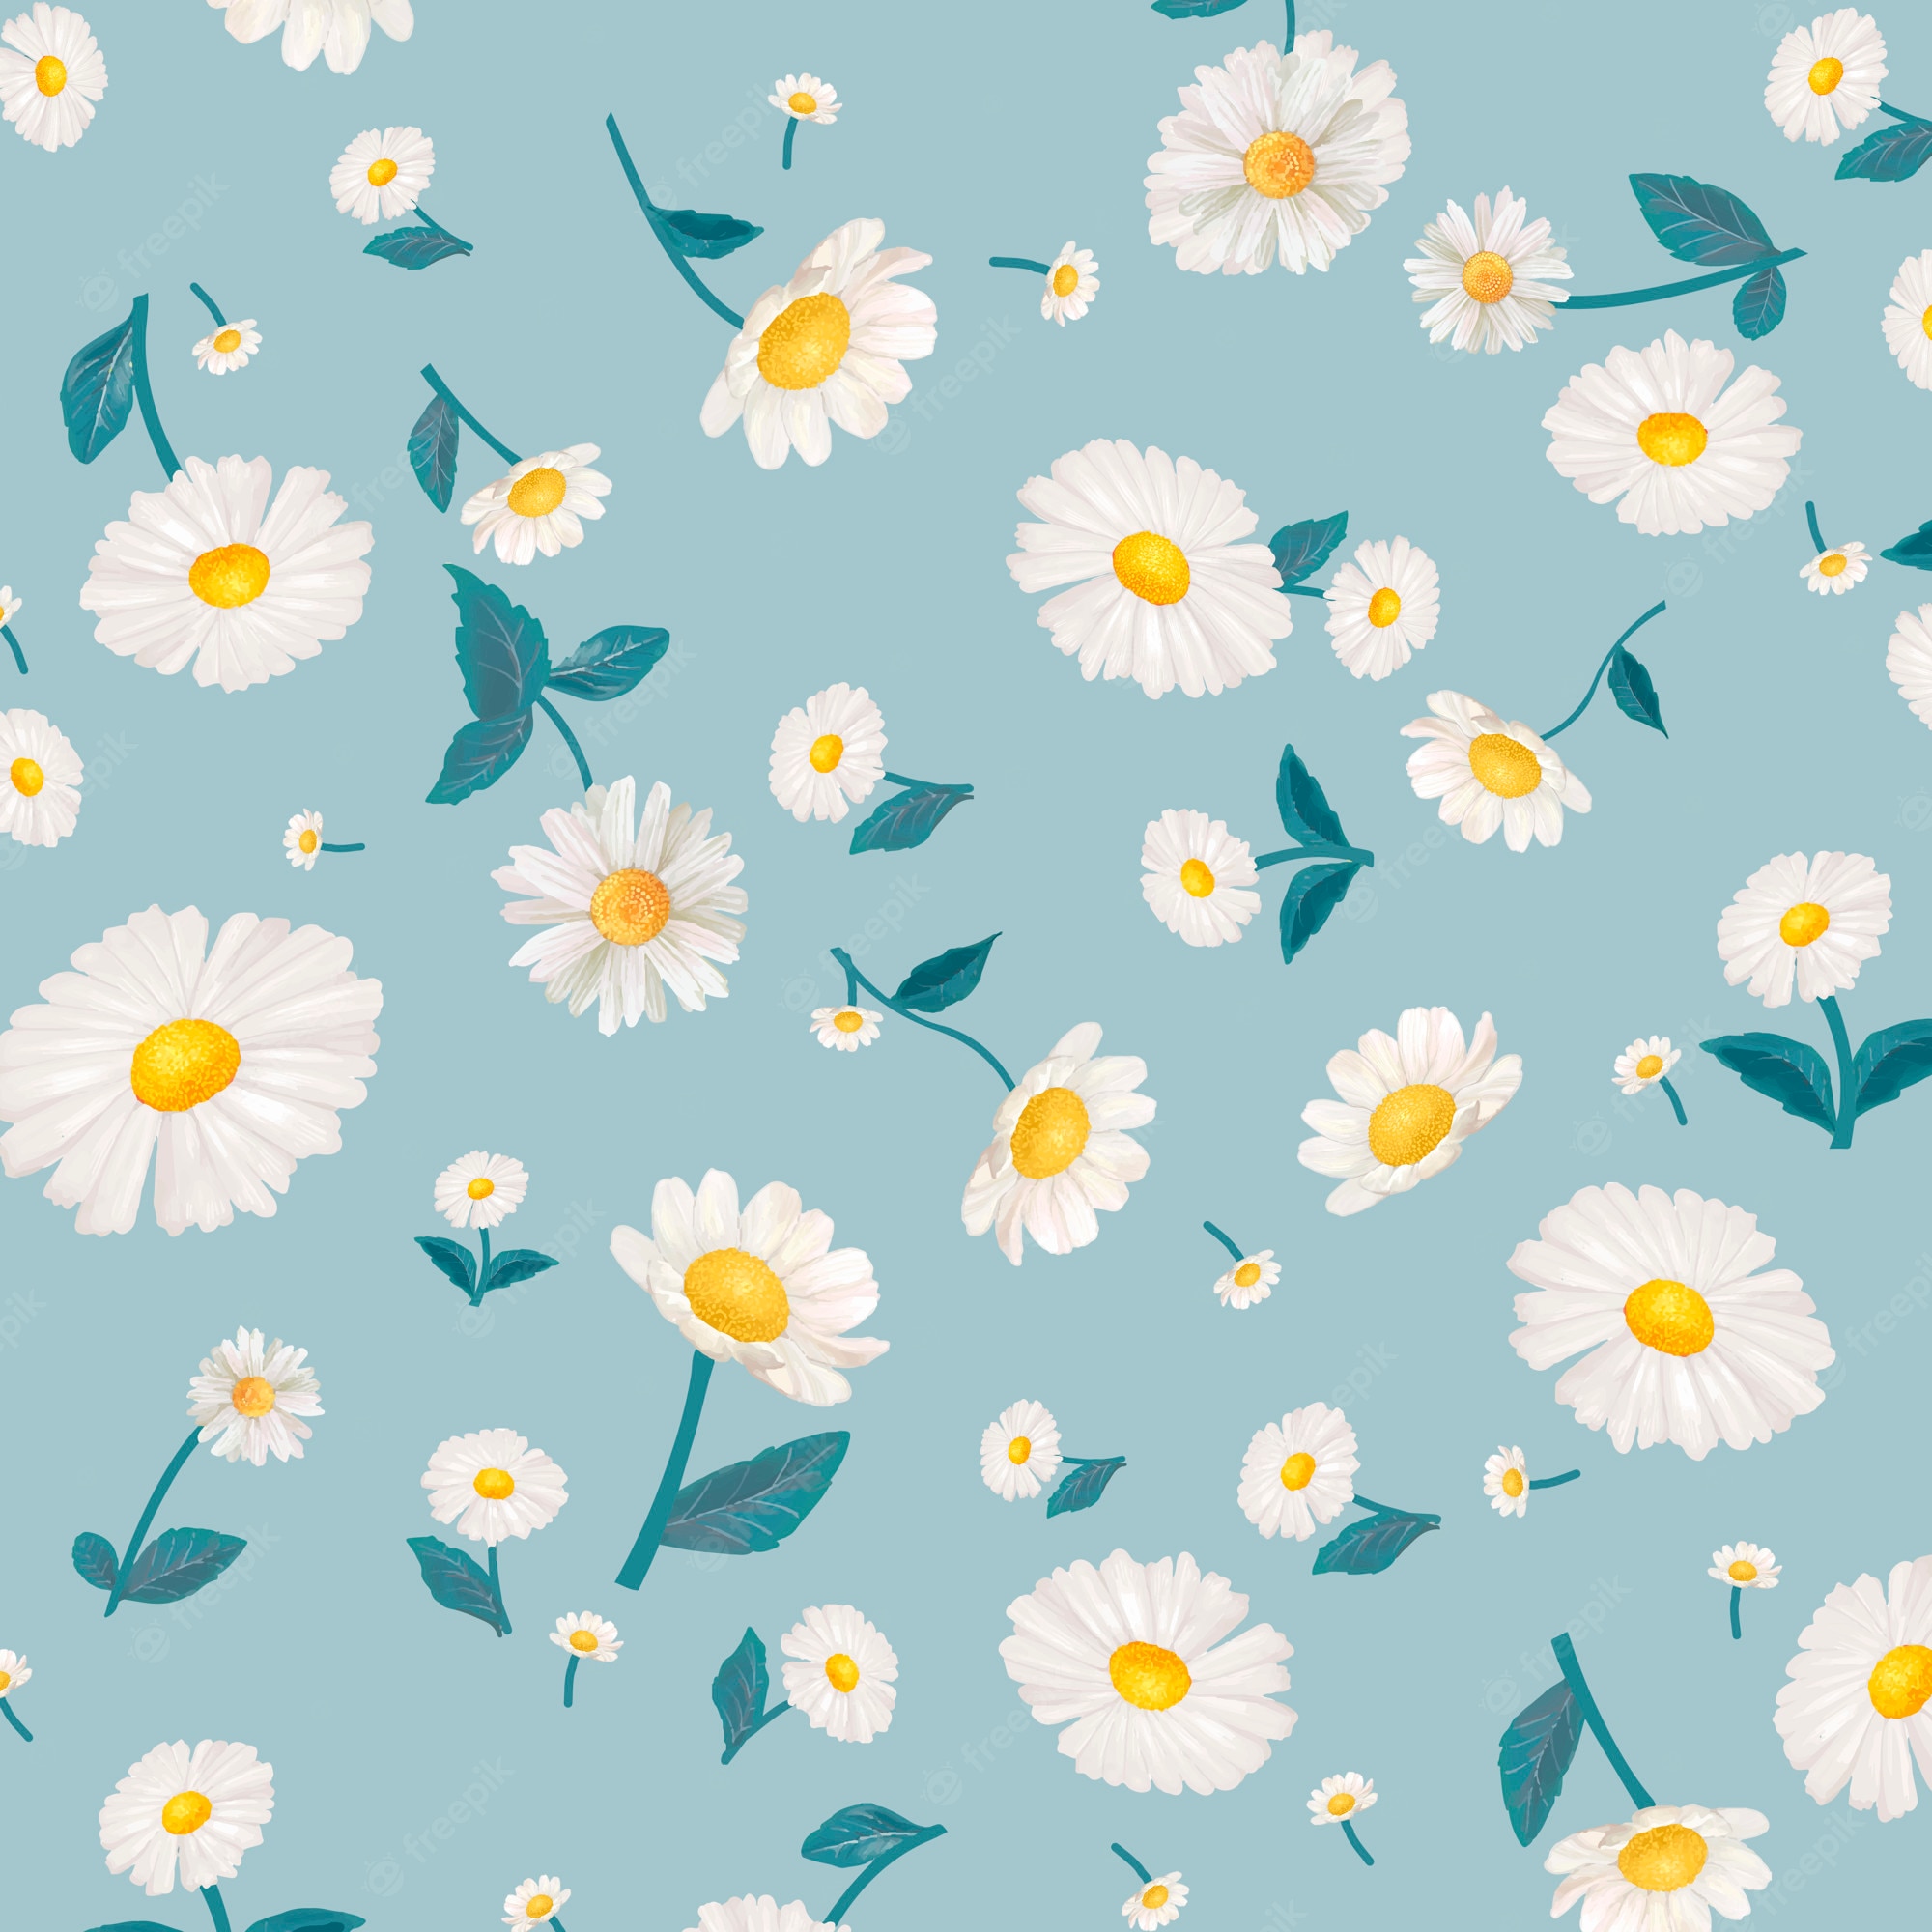 A seamless pattern of white daisies on blue - Daisy